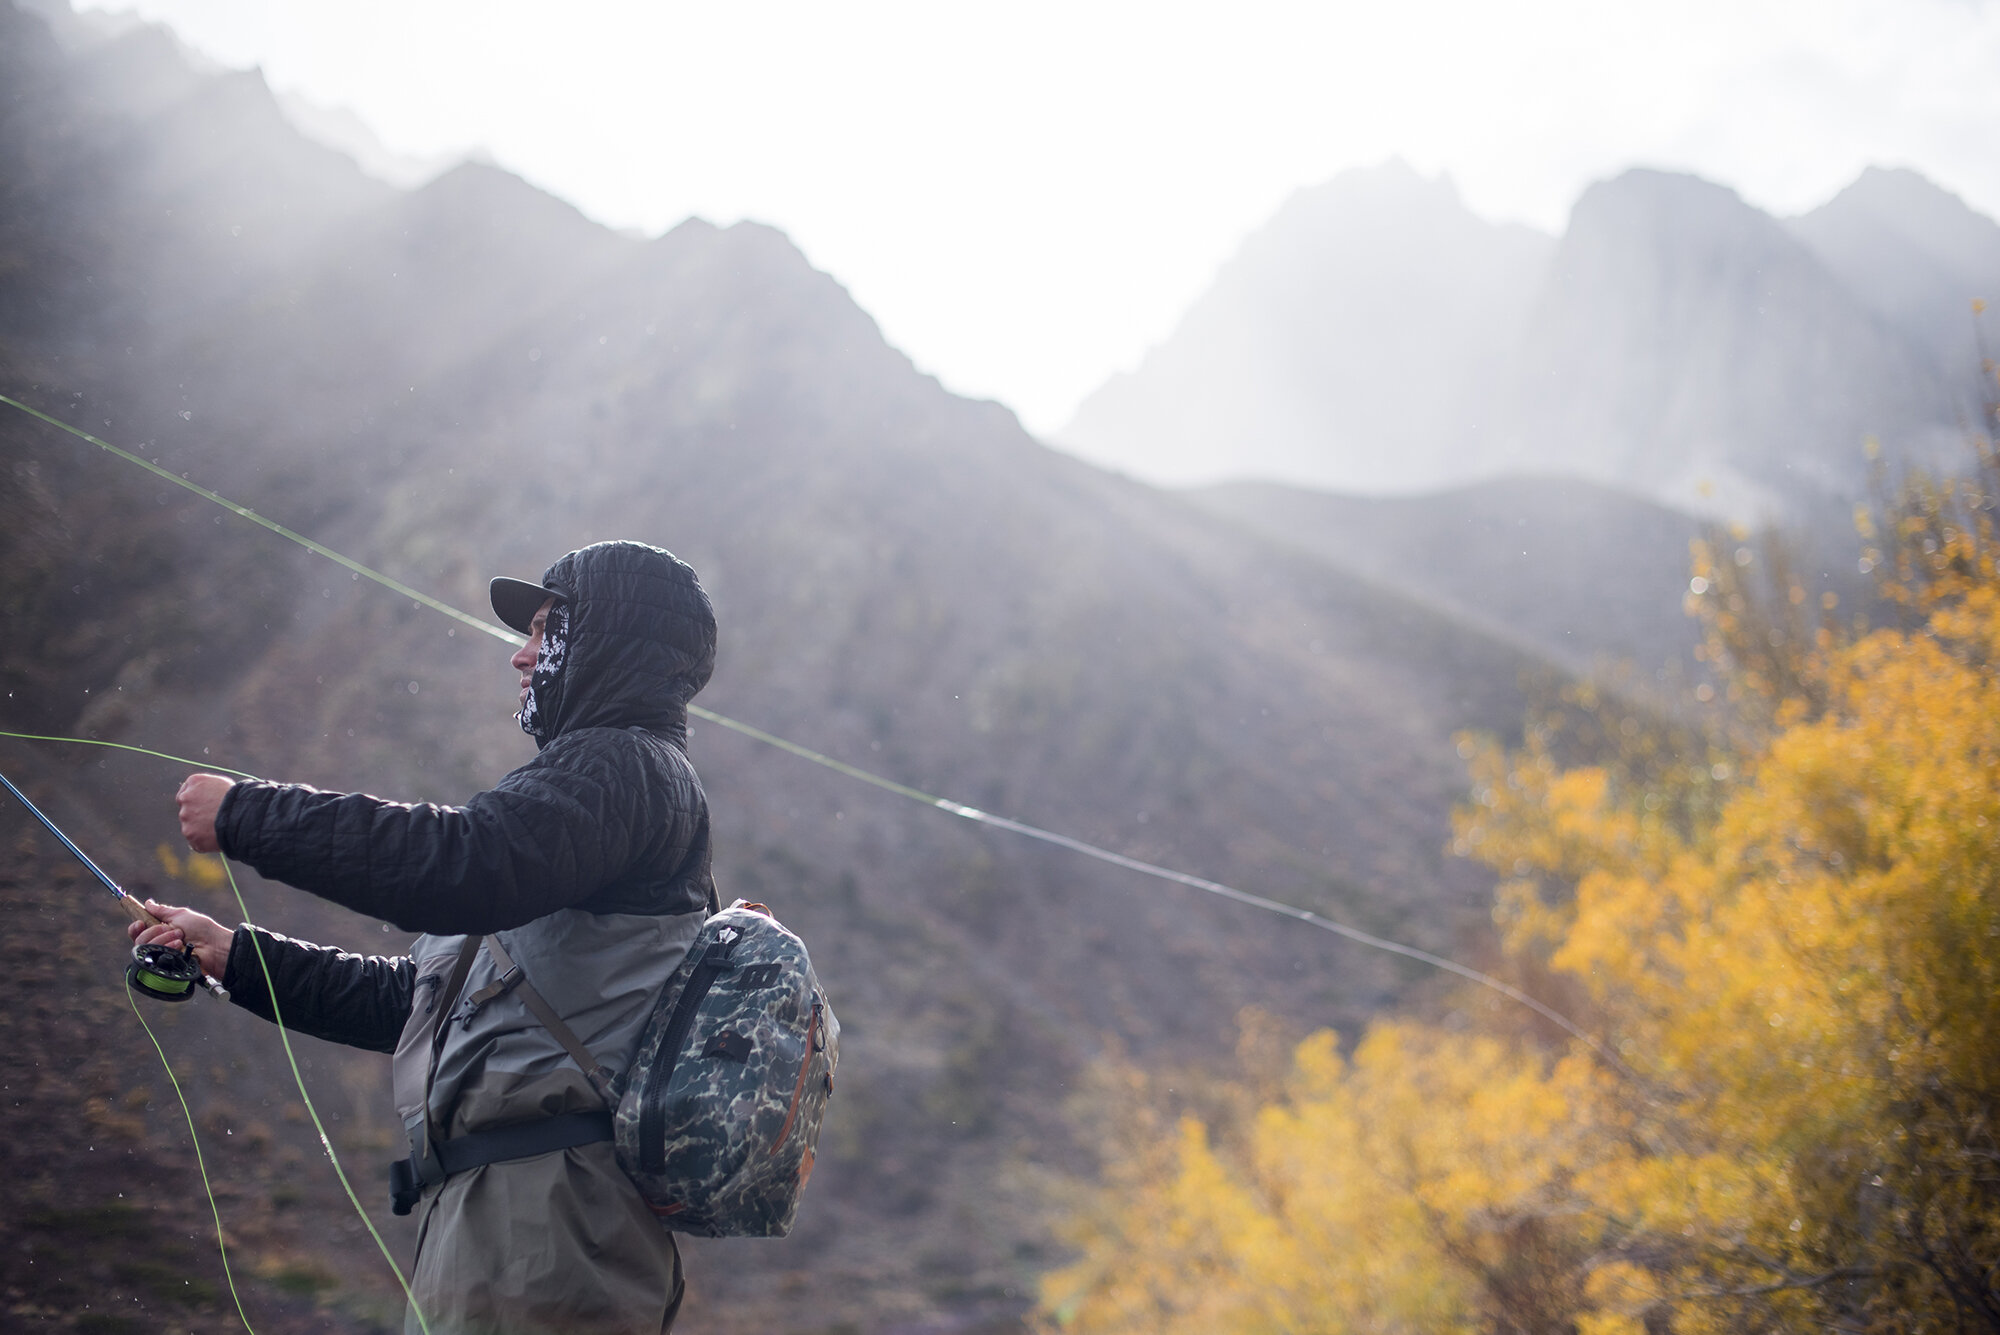  A fly fisherman casting in front of a mountain backdrop.  